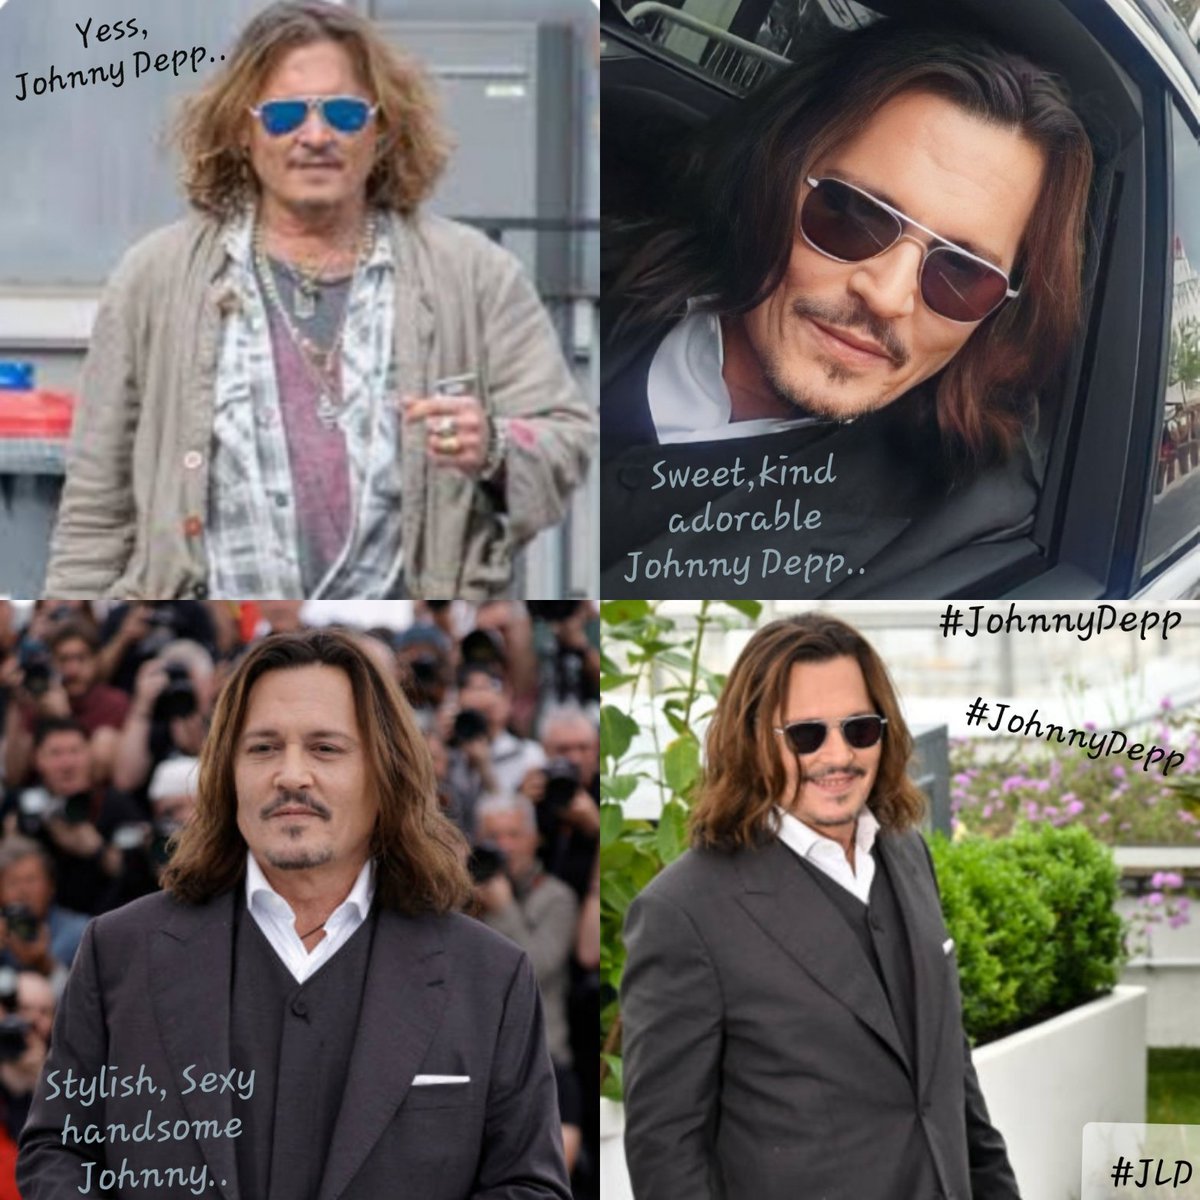 For Johnny Depp to take it easy, relax, refuel, get better..
Enjoy a bit of nature & music, write poems, read books.😎
Take care of yourself Johnny, we'll still be here, your crew..
#GetWellSoonJohnnyDepp
#JohnnyDepp
#JohnnyDeppIsARockStar #JohnnyDeppRises #JohnnyDeppIsALegend